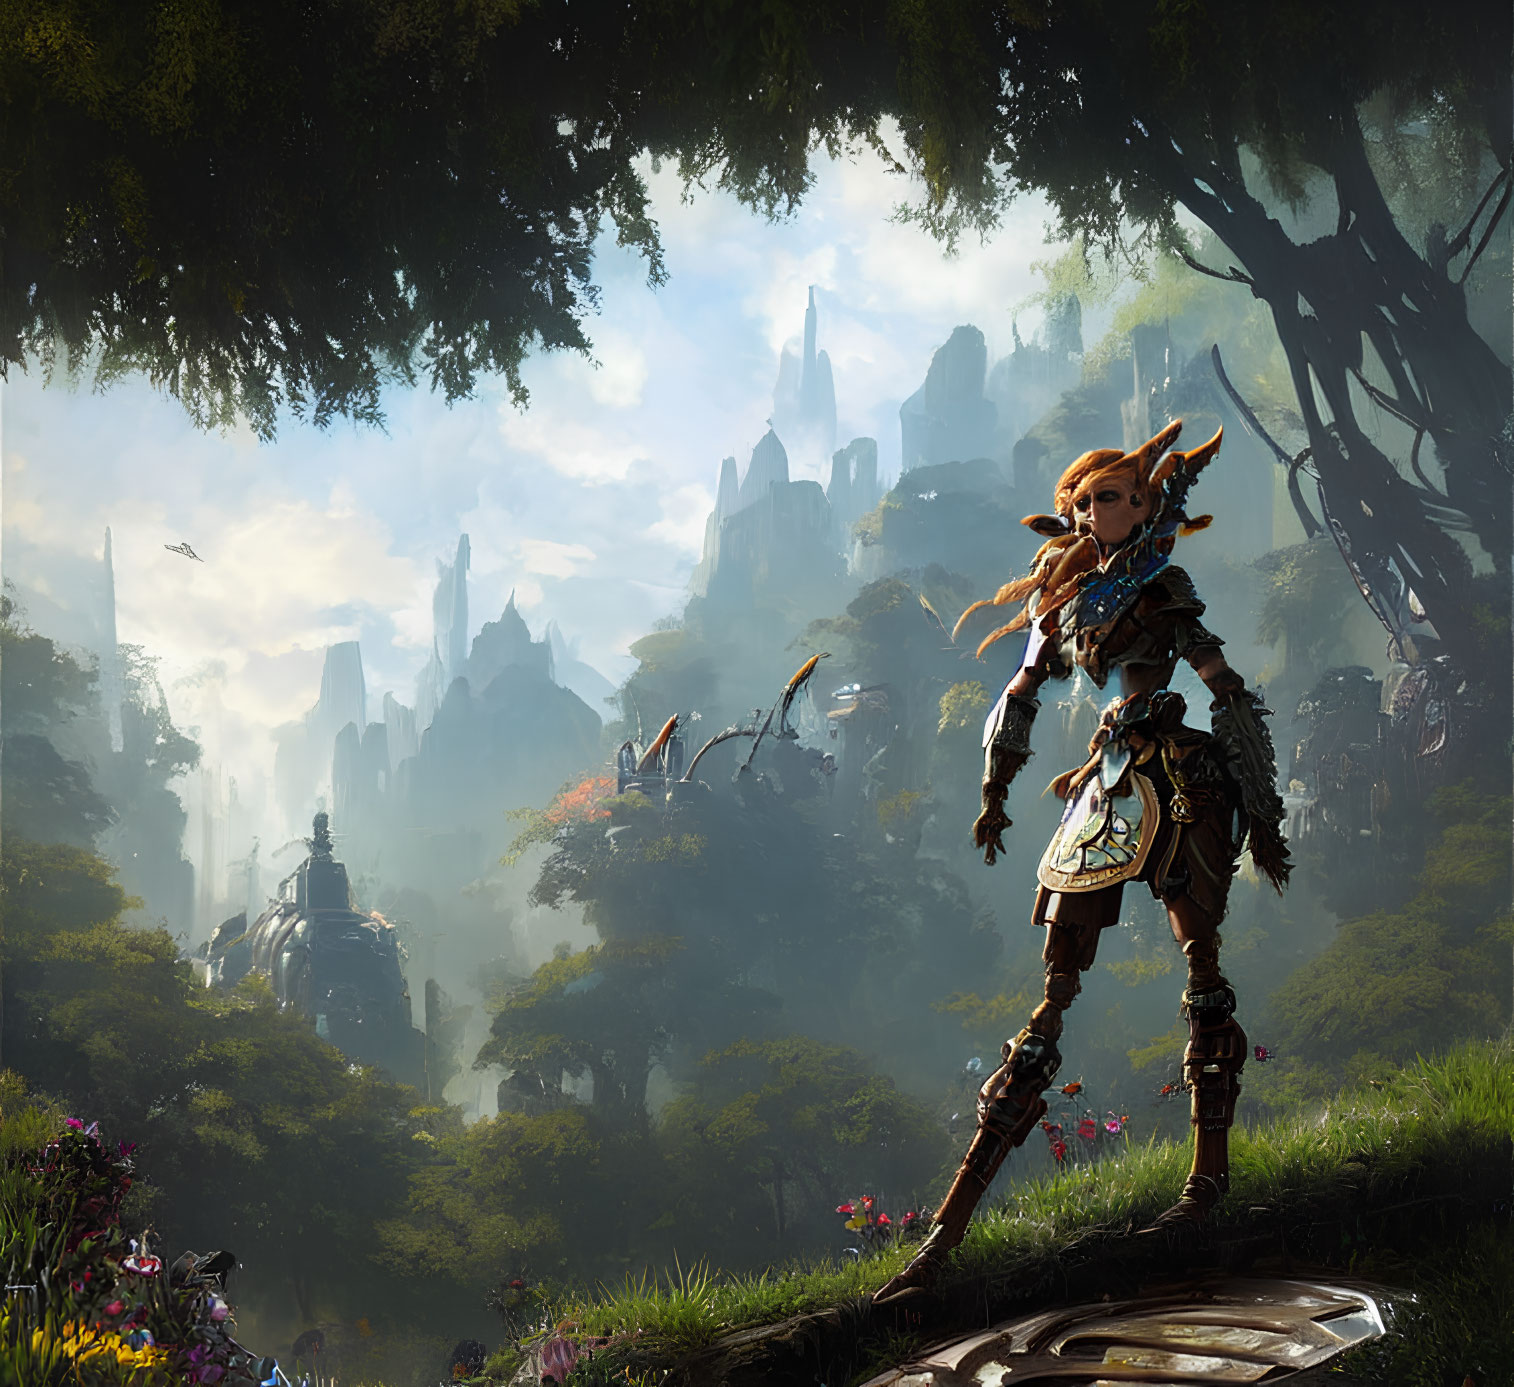 Female warrior in ornate armor in lush fantasy forest with ruins and distant city under hazy sky